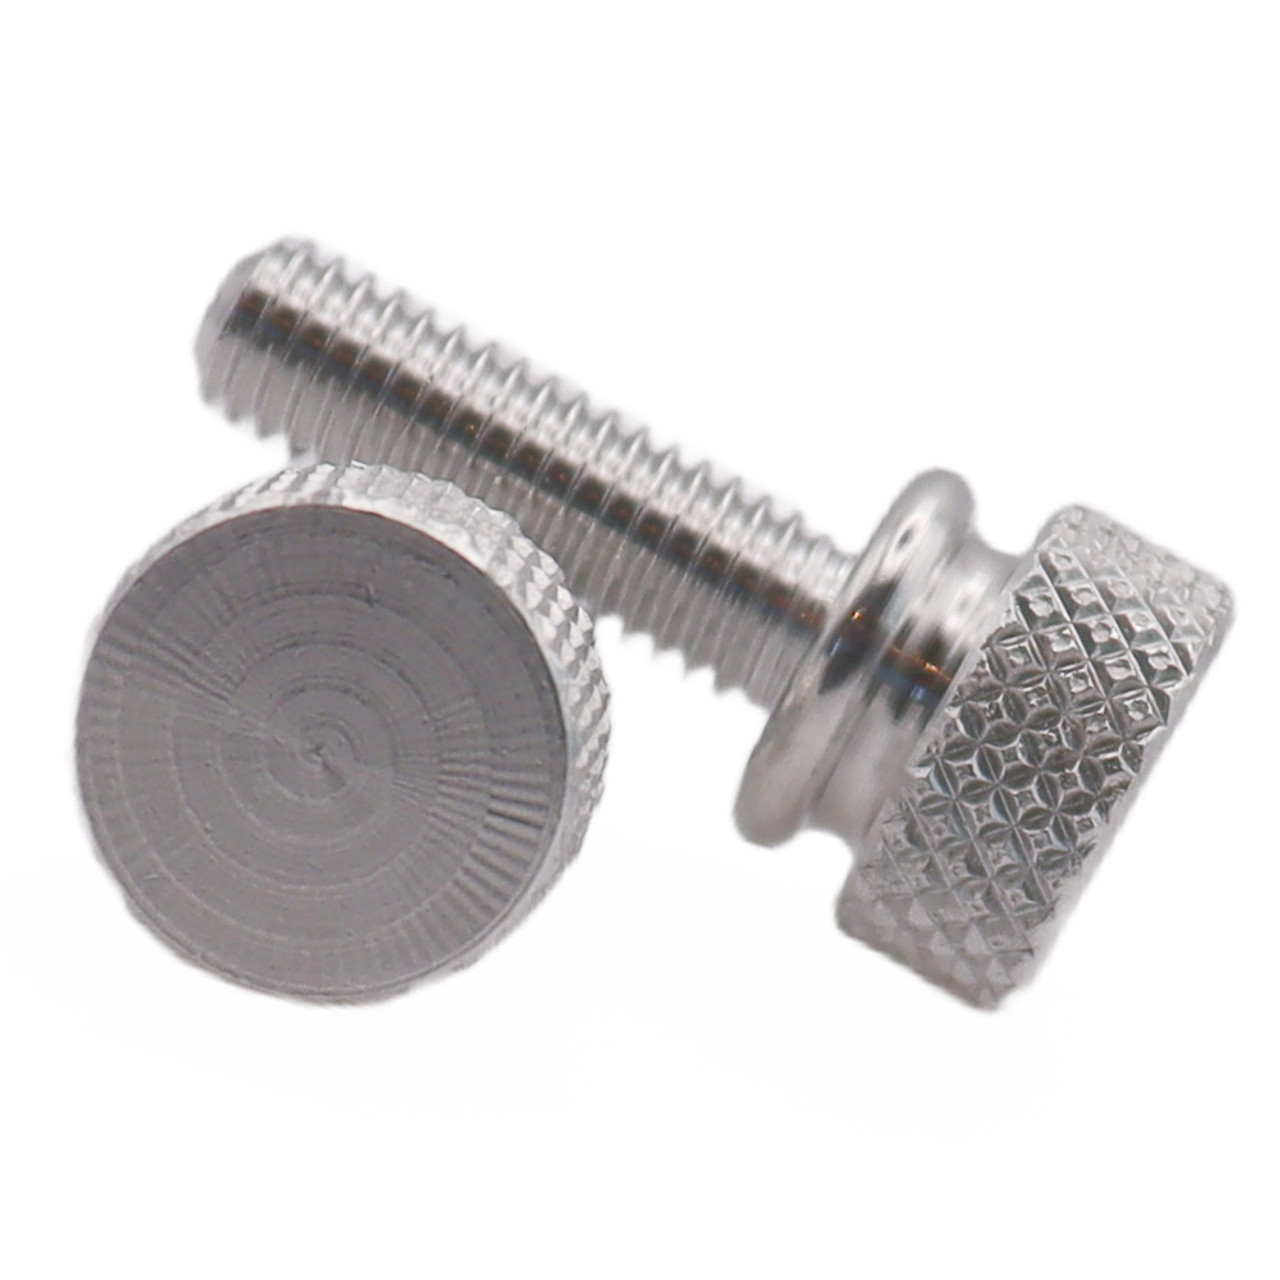 #10-32 x 1/2" (FT) Fine Thread Knurled Thumb Screw with Washer Face Aluminum